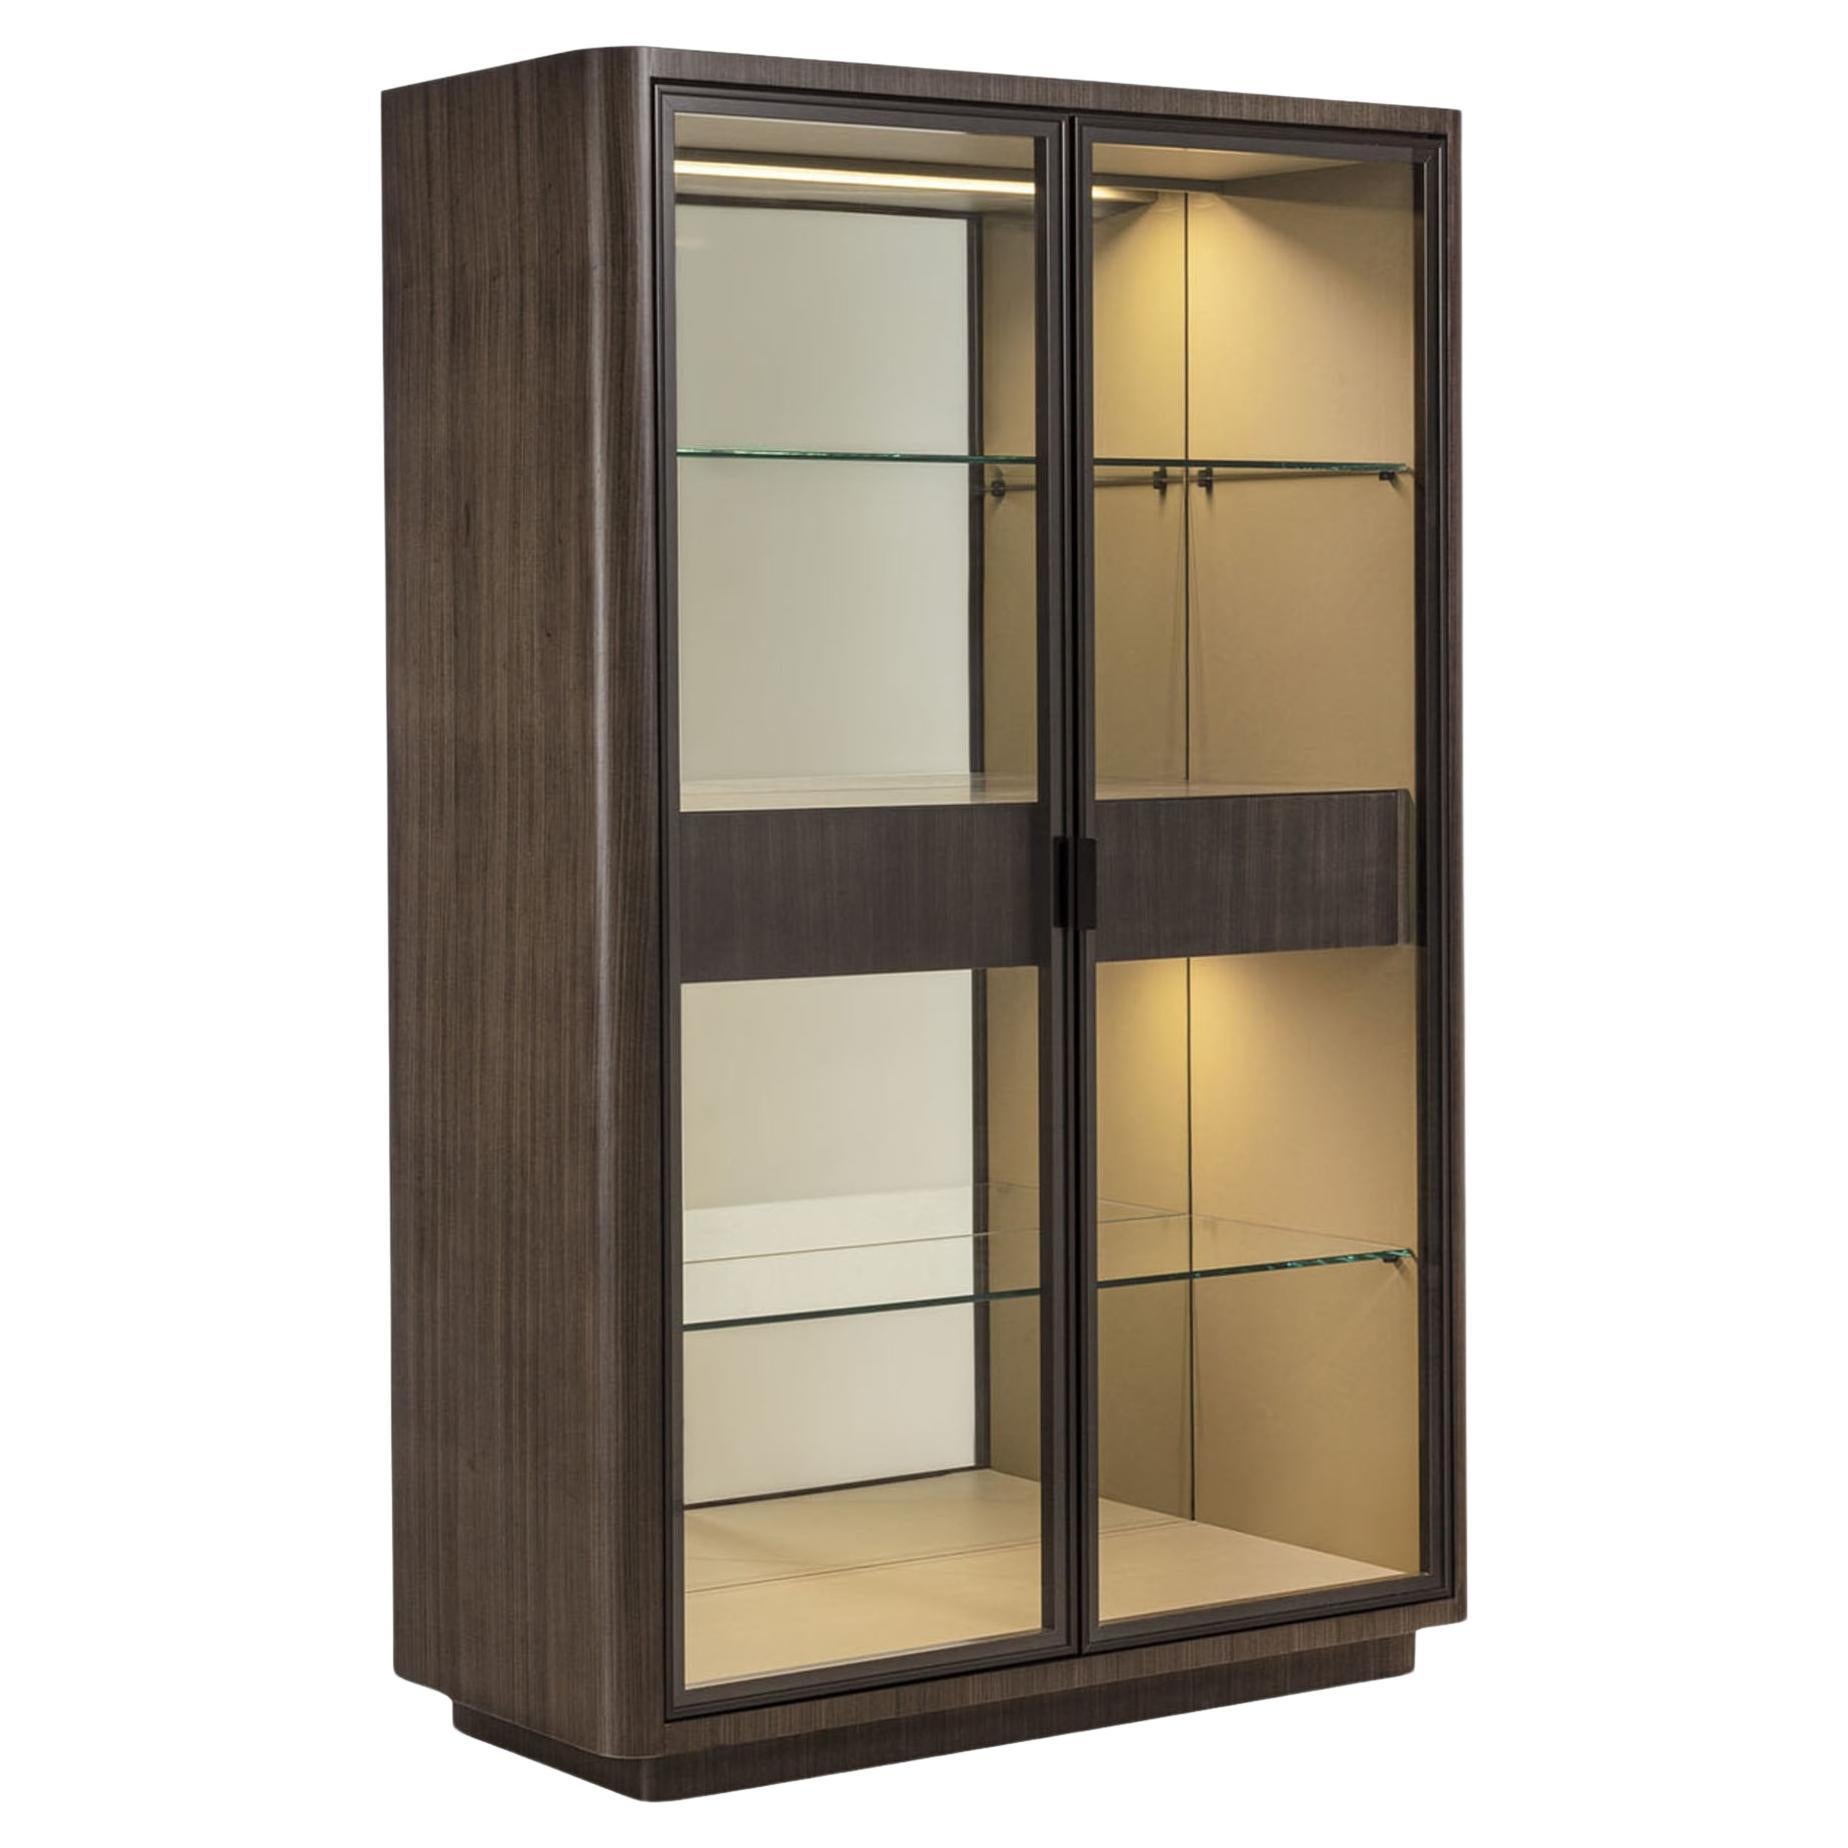 Dafne Glass Cabinet With Drawers en vente